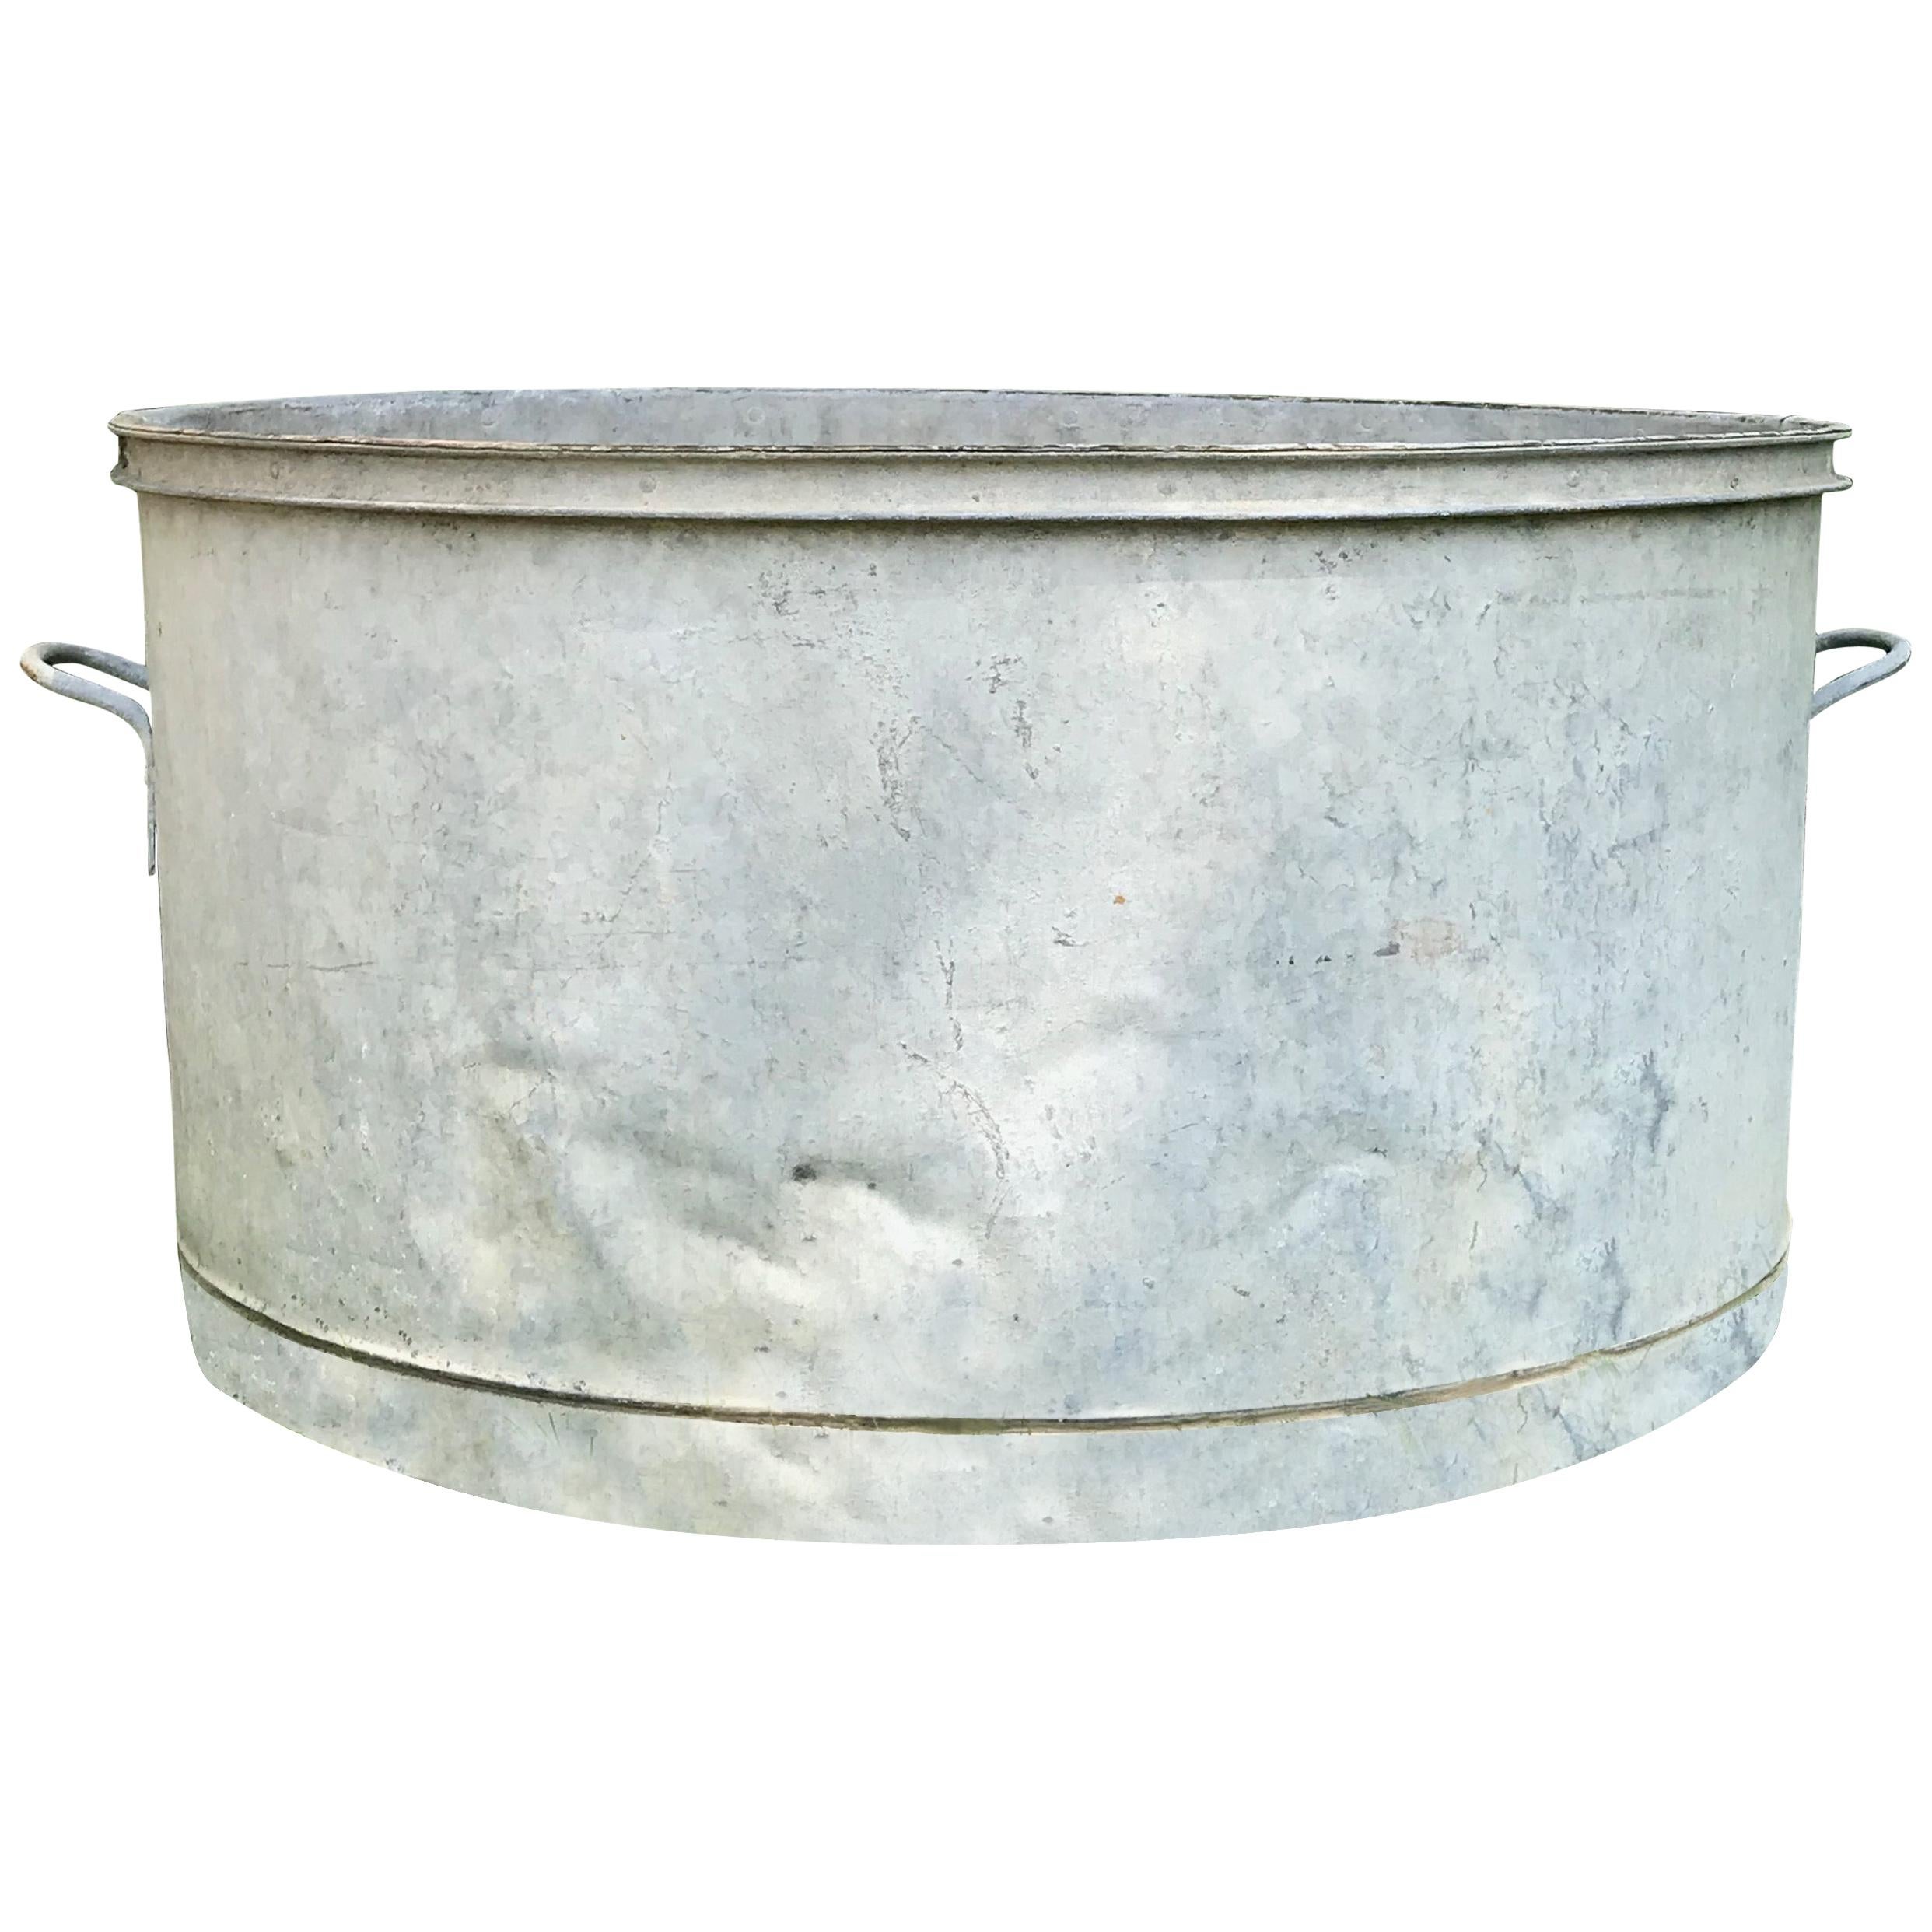 Large Round French Galvanized Tub Planter or Fountain